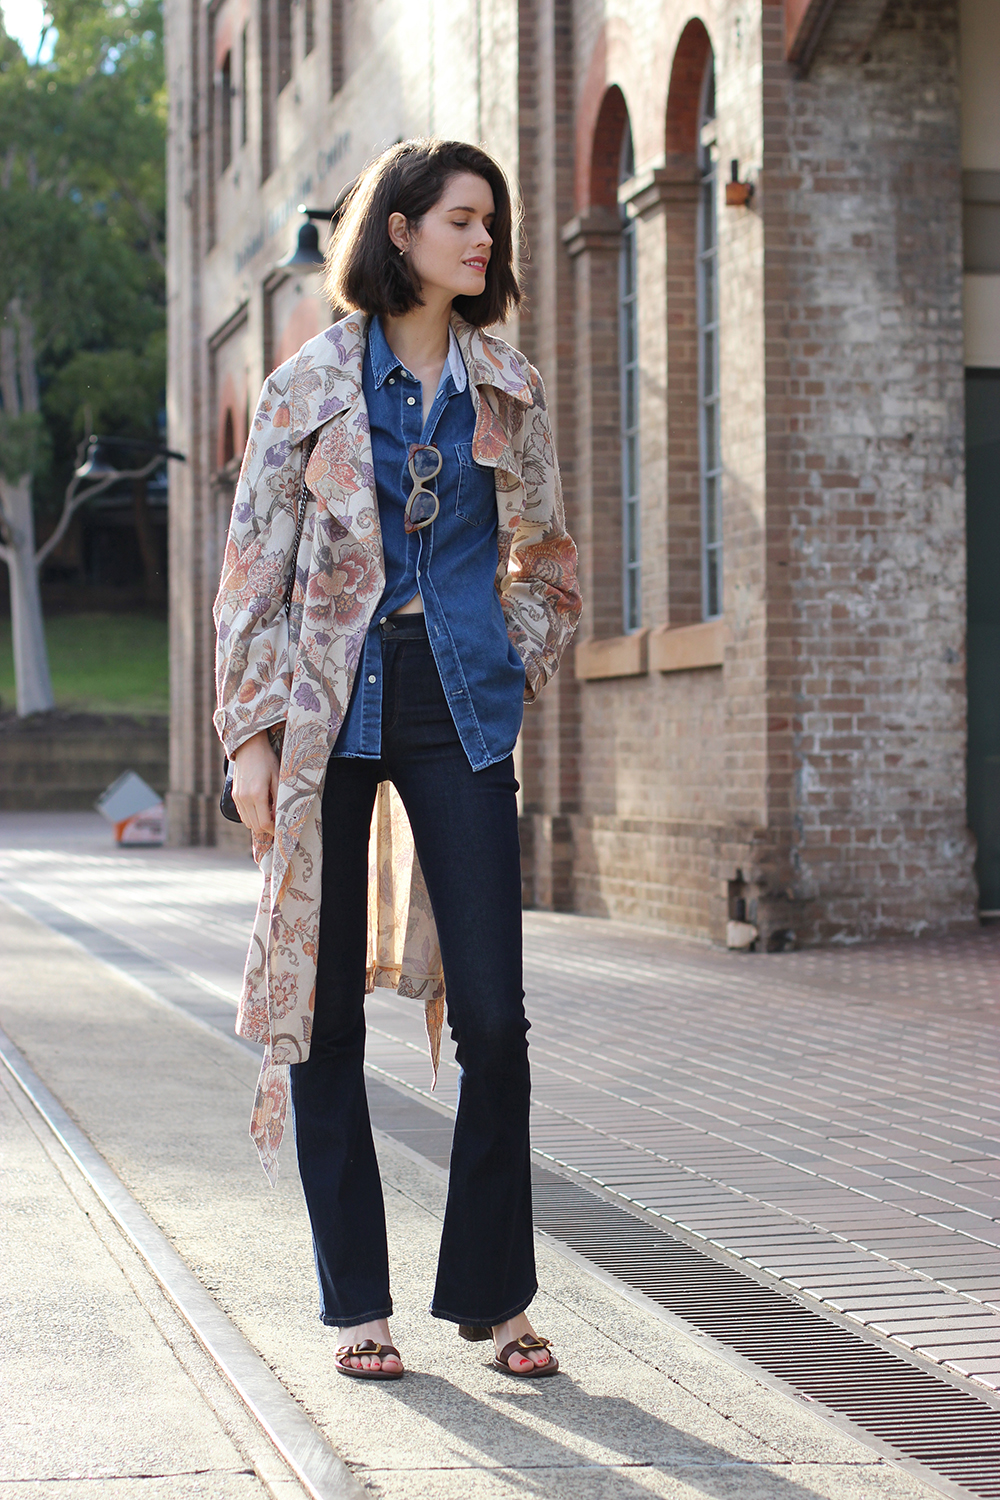 Australian Fashion Blog | Chloe Hill wearing Karen walker trench coat, acne denim shirt, pared sunglasses, Alila floral print bag and citizens of humanity sculpt flares at carriage works